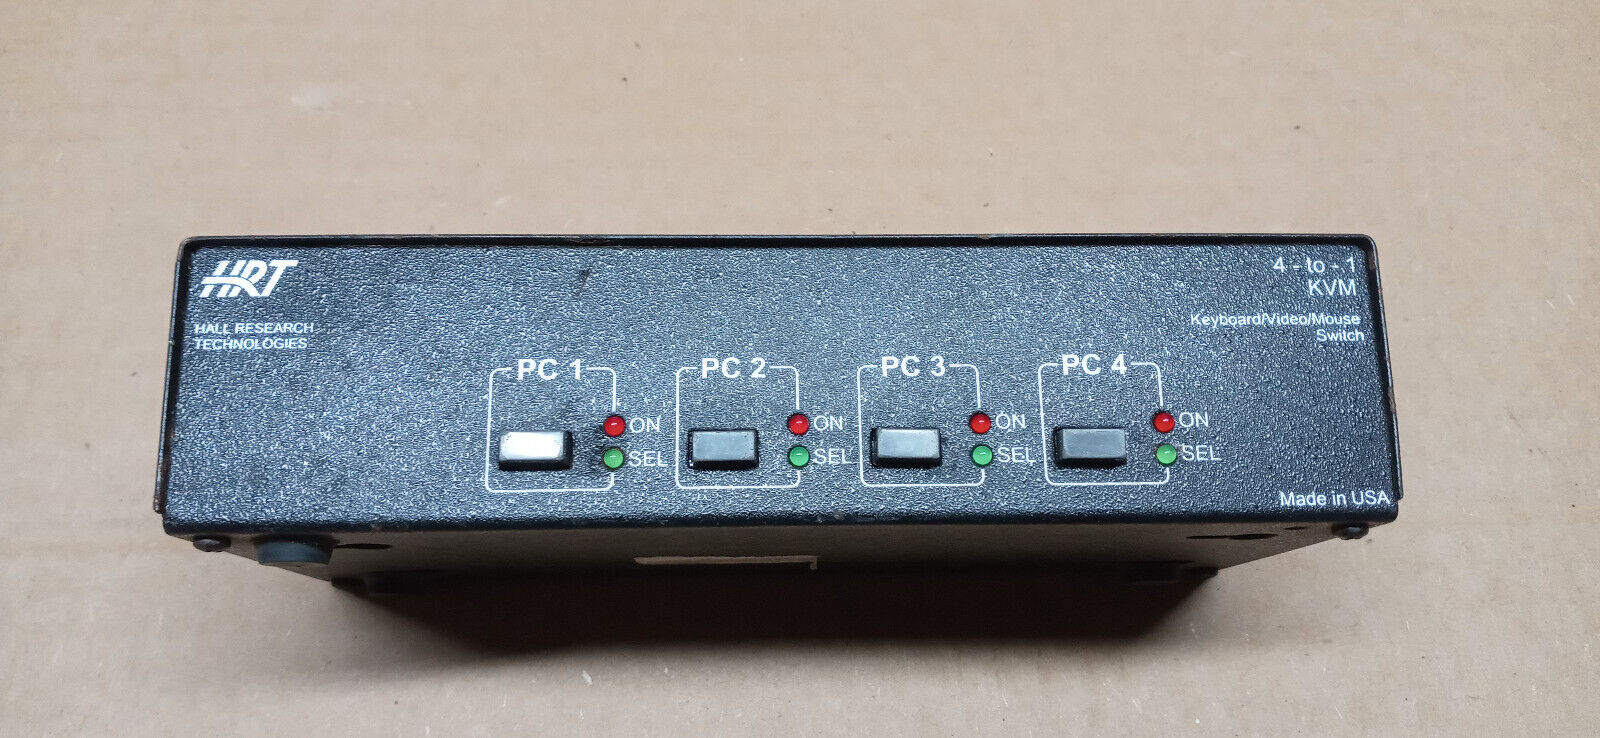 hrt hall research kvm switch 4 PC Data Switch VGA PS2, Pre-Owned, Checked